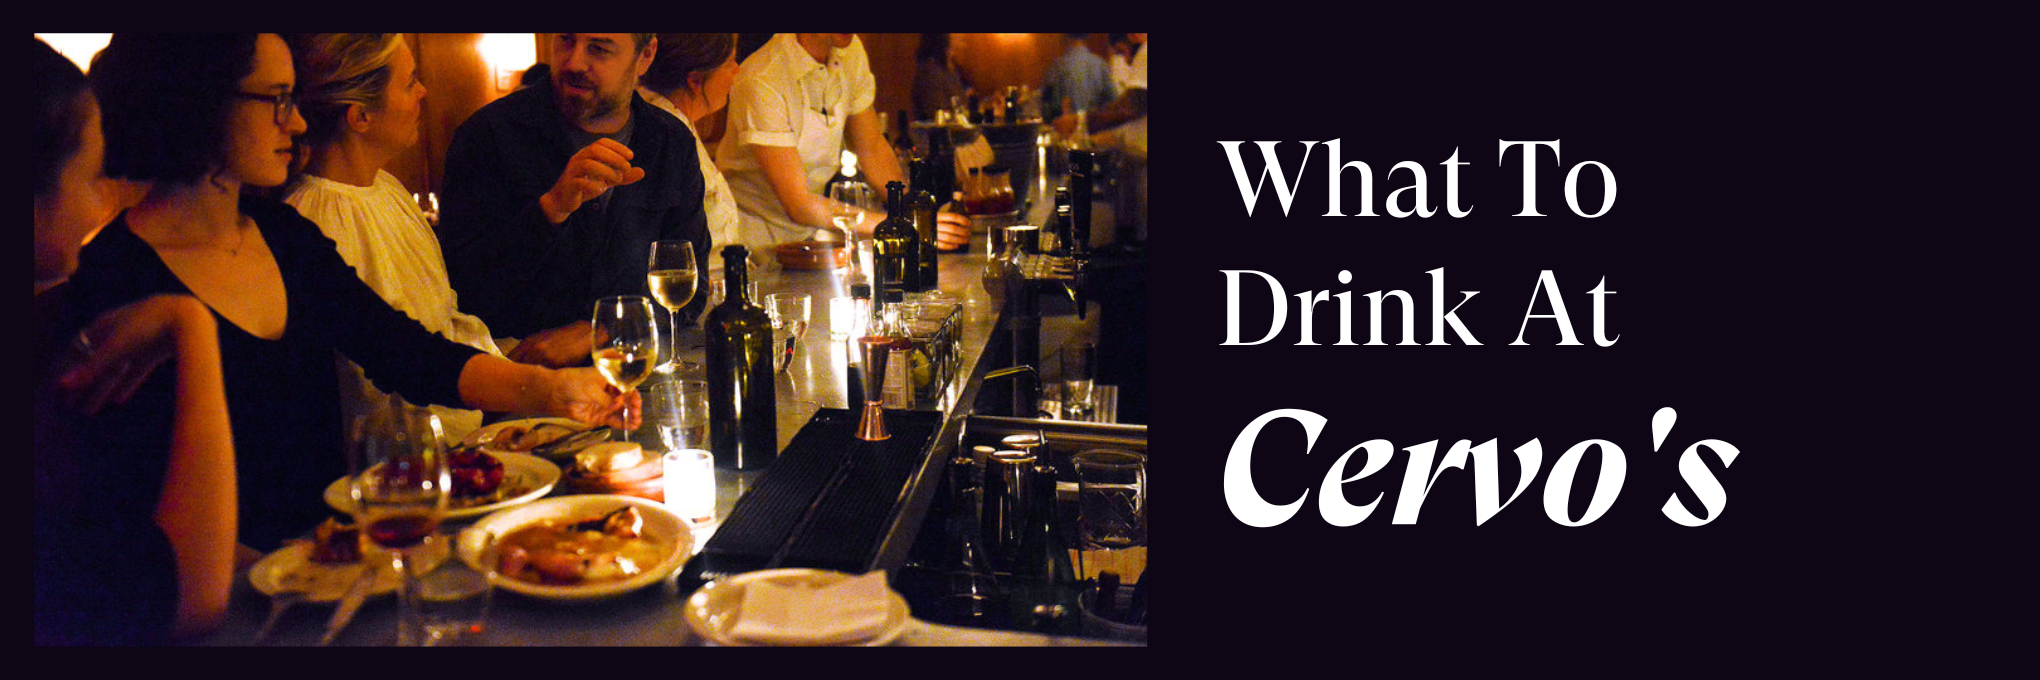 What Wine To Drink At Cervo's